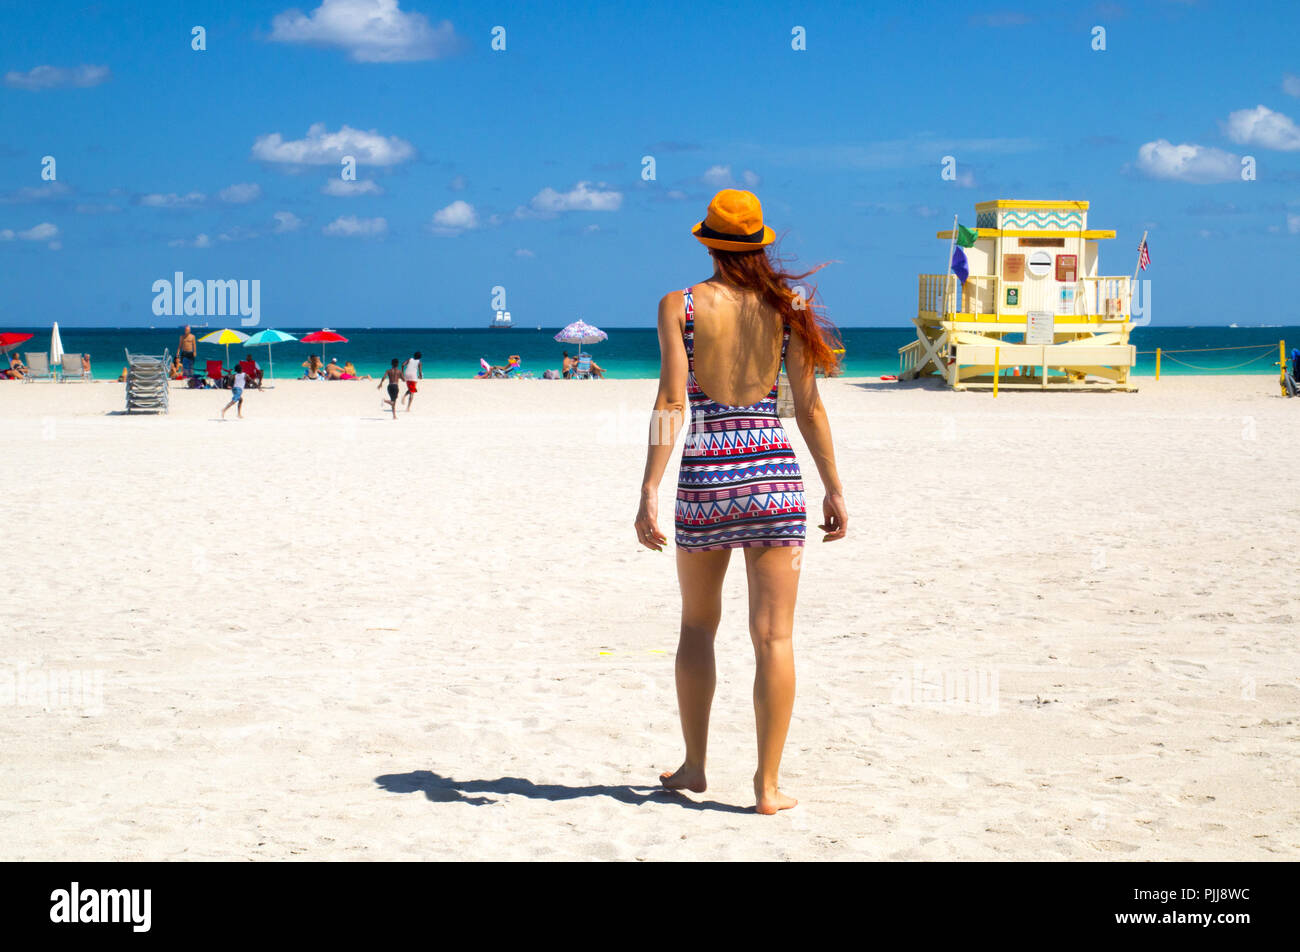 Holiday at Miami Beach Florida. Back view of red hair woman in fashionable  style summer outfit, lifeguard tower, children and sunbathing people, USA  Stock Photo - Alamy